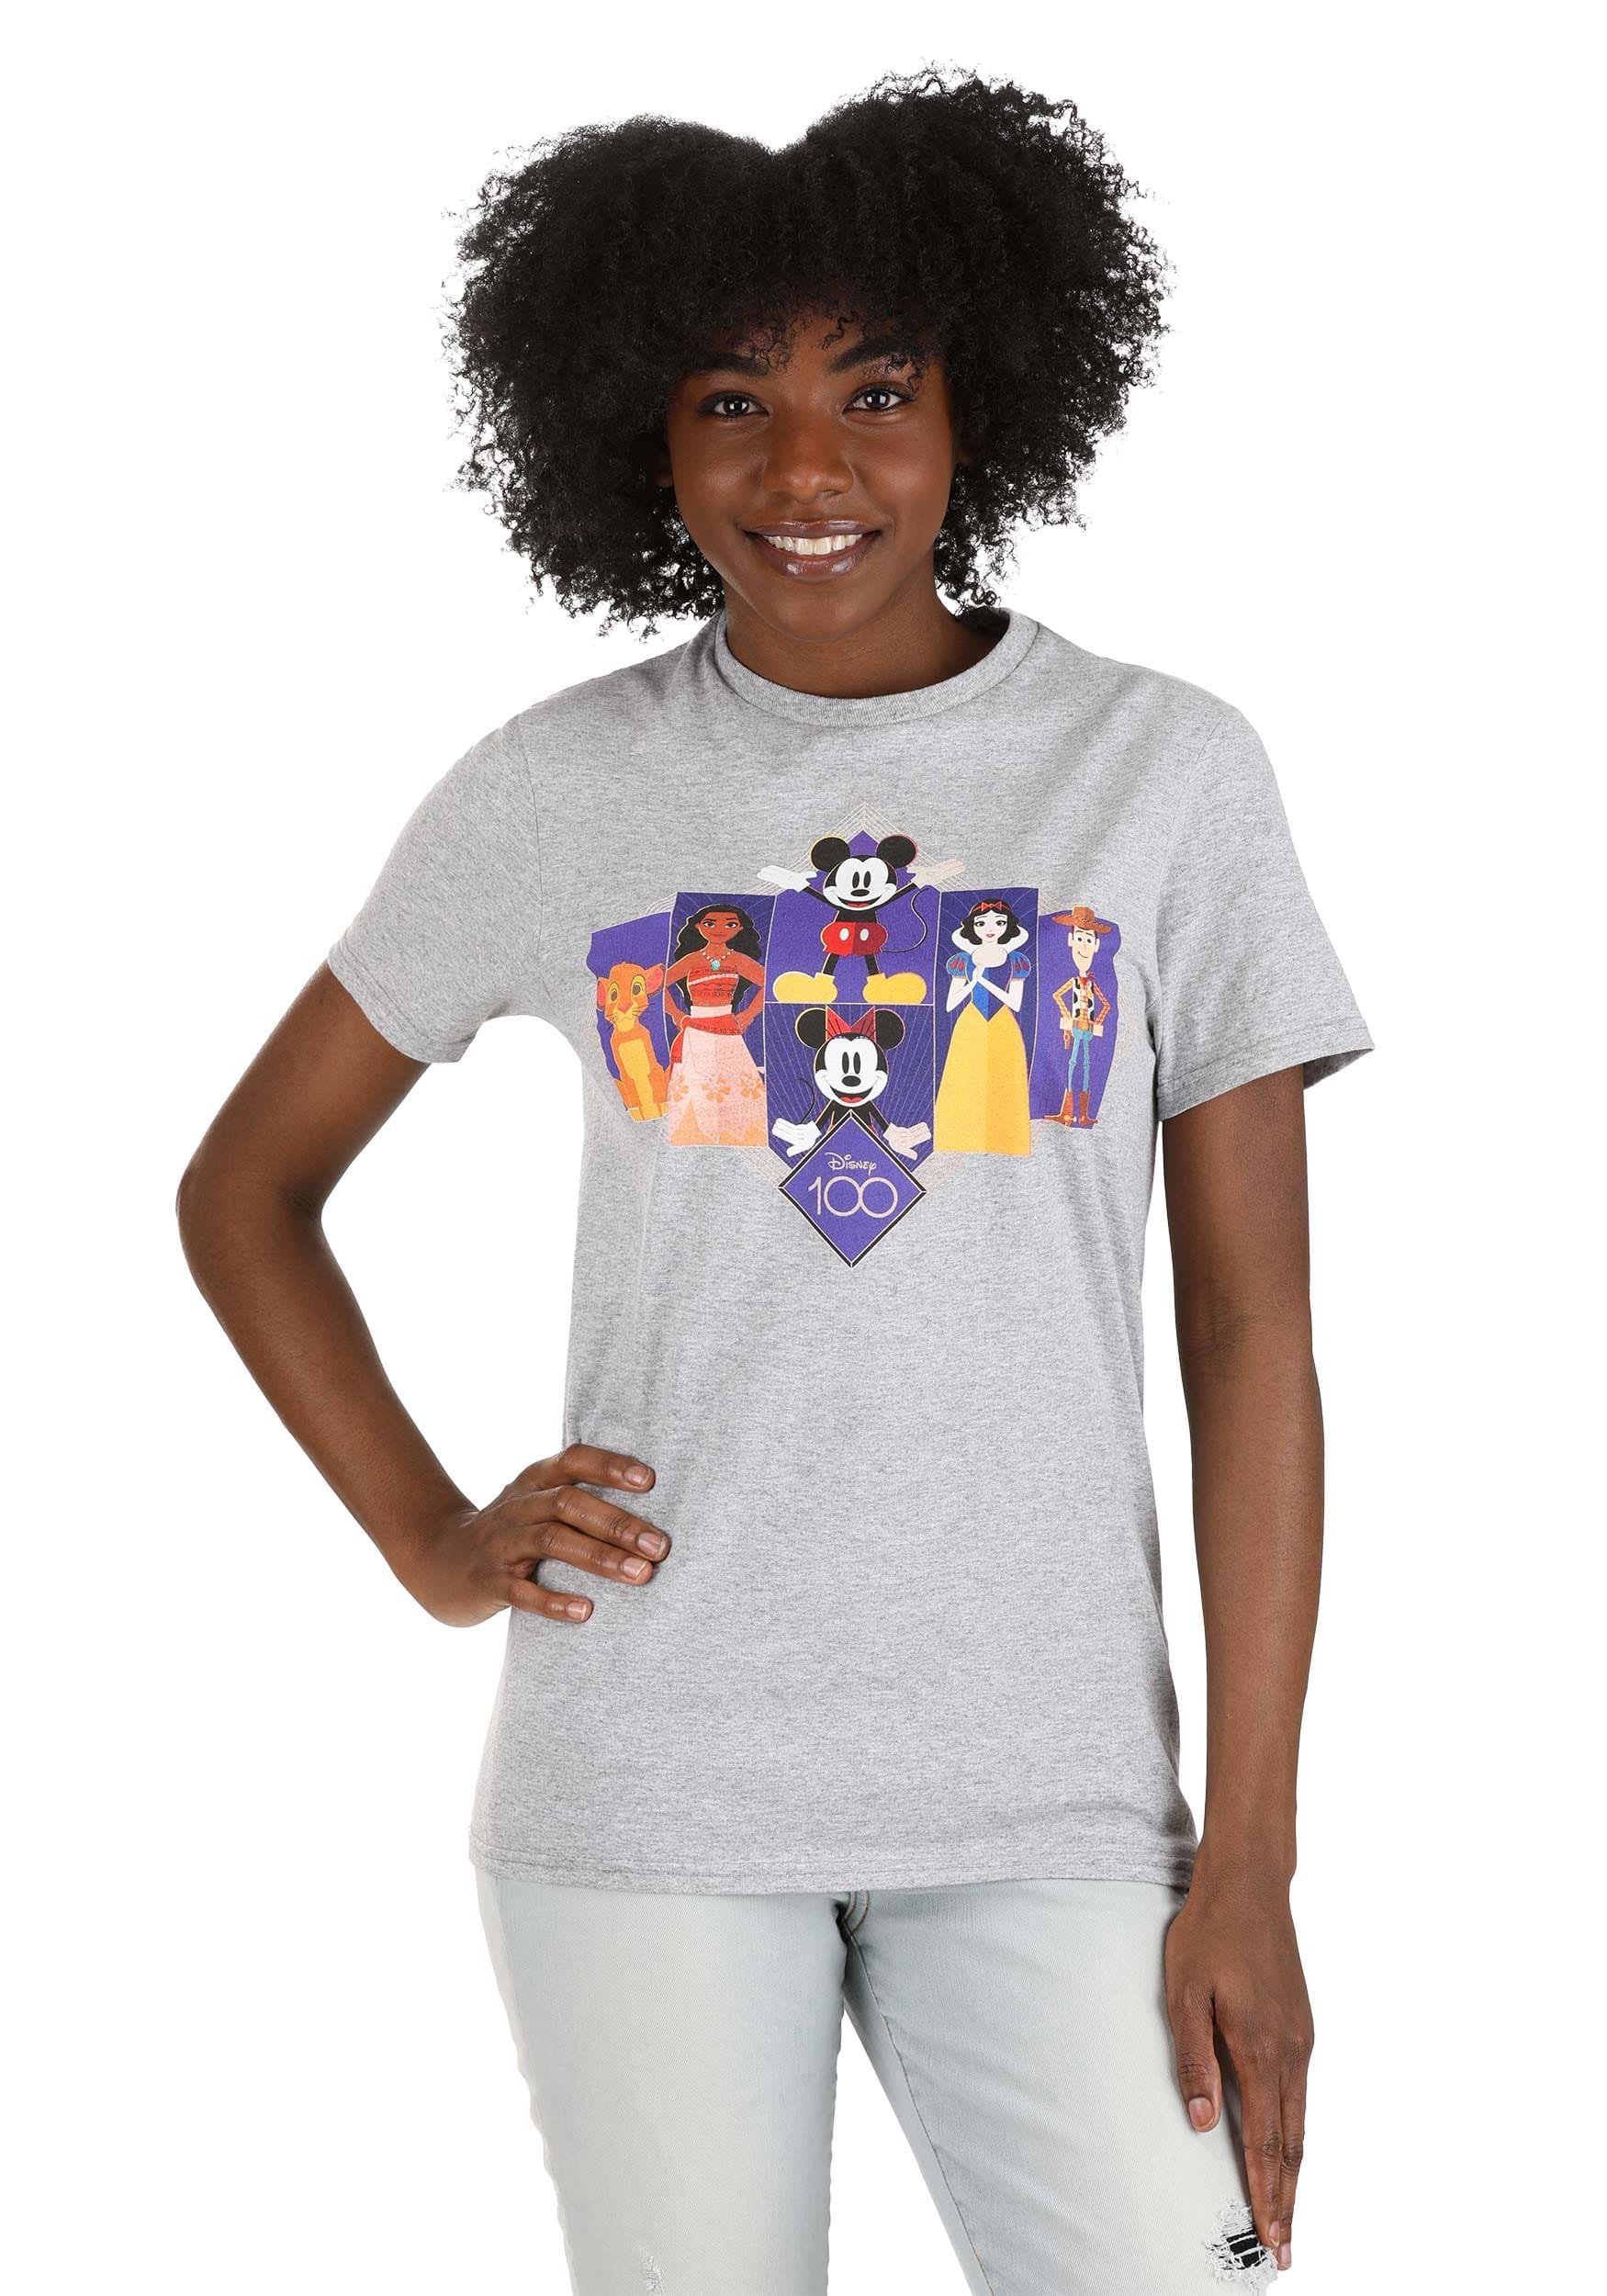 Disney 100 Inside Out Group Characters T-Shirt Disneyland 100th Anniversary  - Listentee